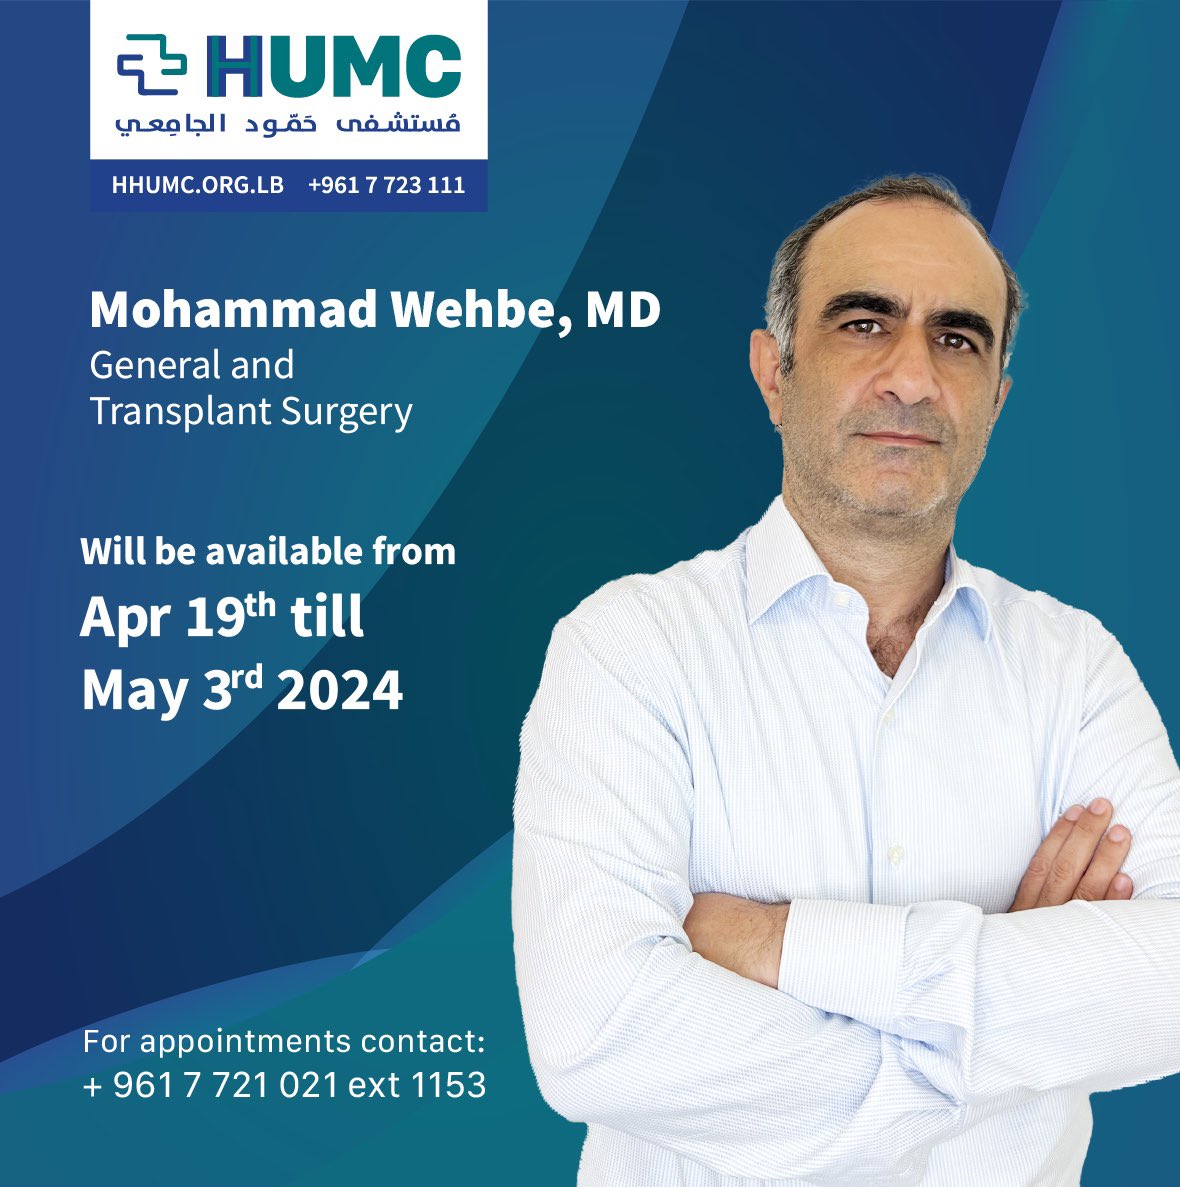 Mohammad Wehbe, MD, General and Transplant Surgeon, will be available at HHUMC from the 19th of April till the 3rd of May, 2024. Call us to book your appointment: + 961 7 721 021 ext 1153 #hhumc